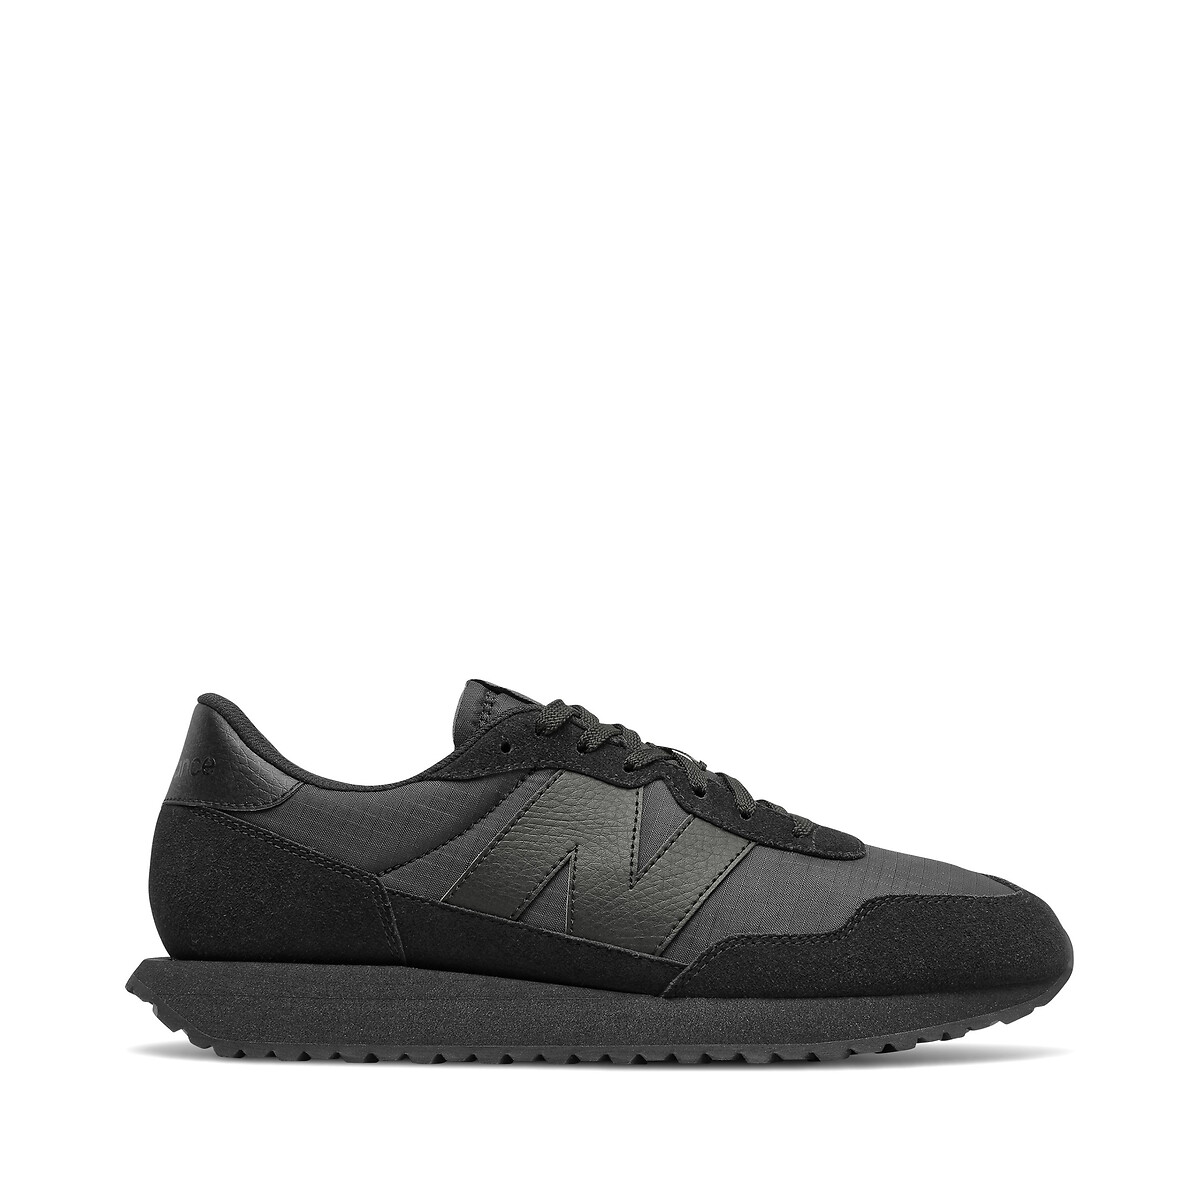 Ms327 suede trainers , black, New Balance | La Redoute